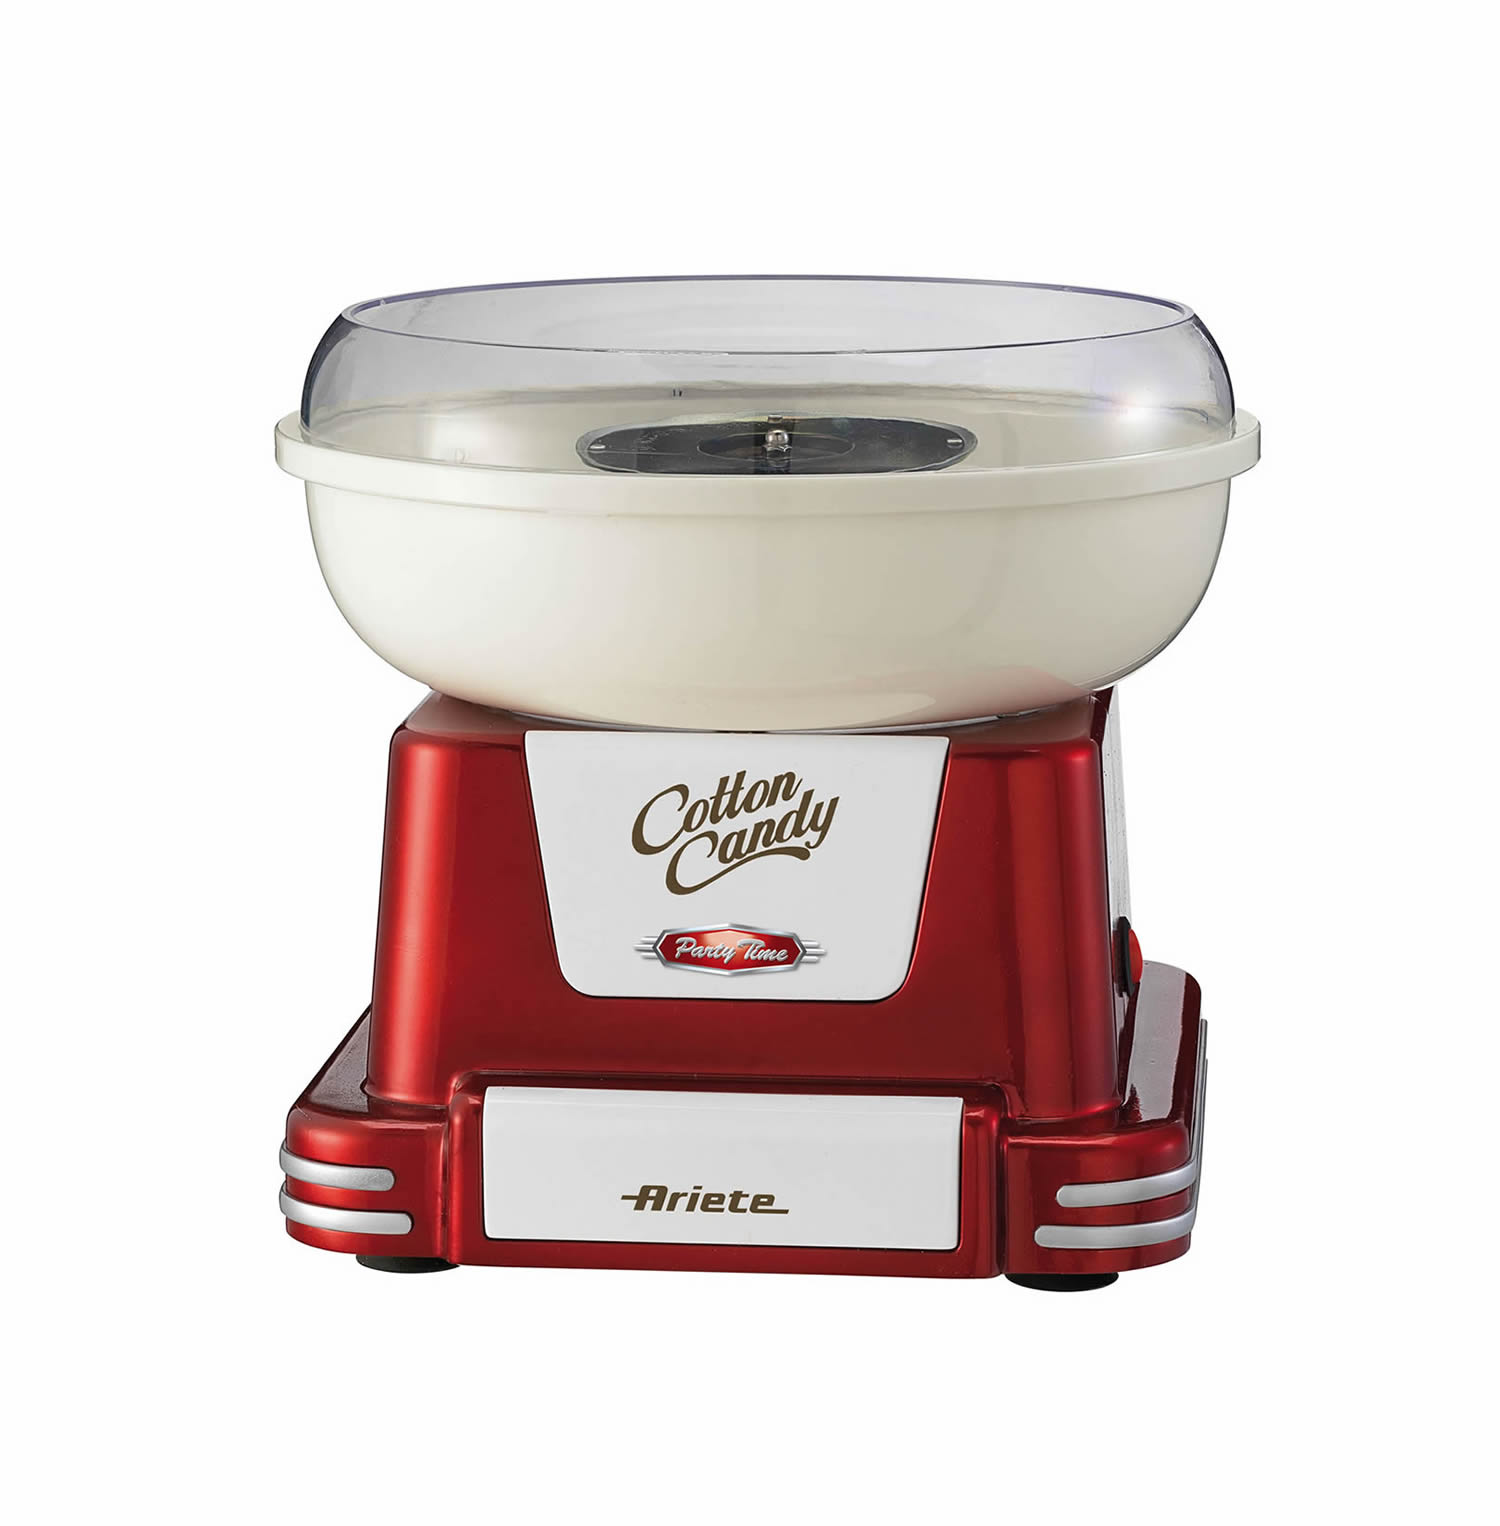 Ariete 2971 Cotton Candy Maker 2971, 450 W, Red